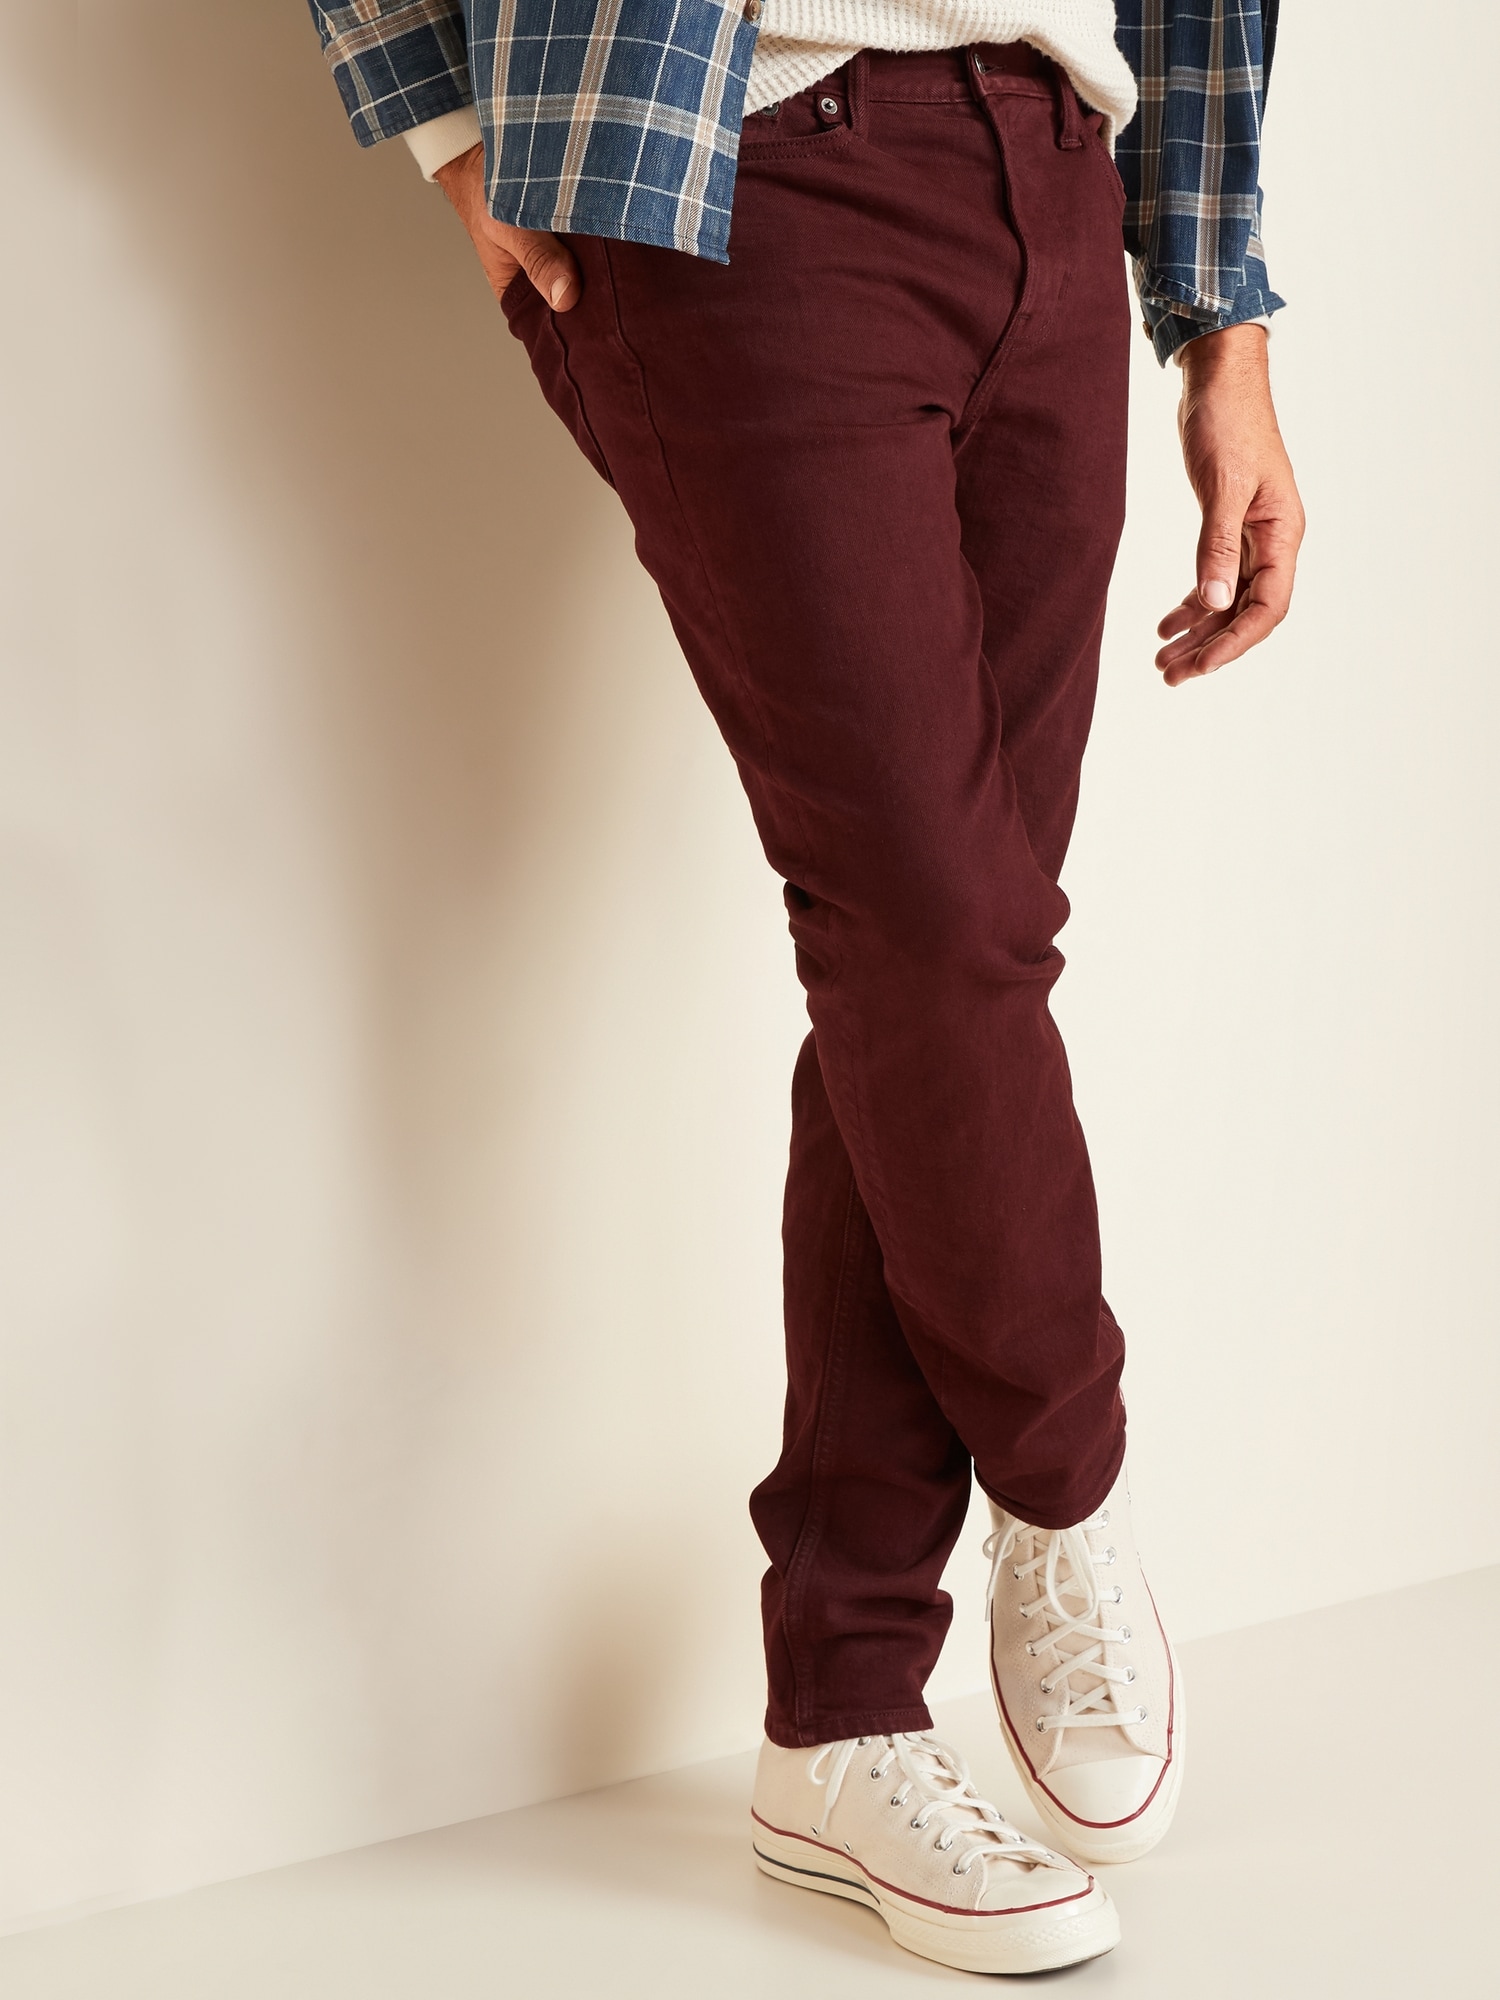 old navy relaxed slim